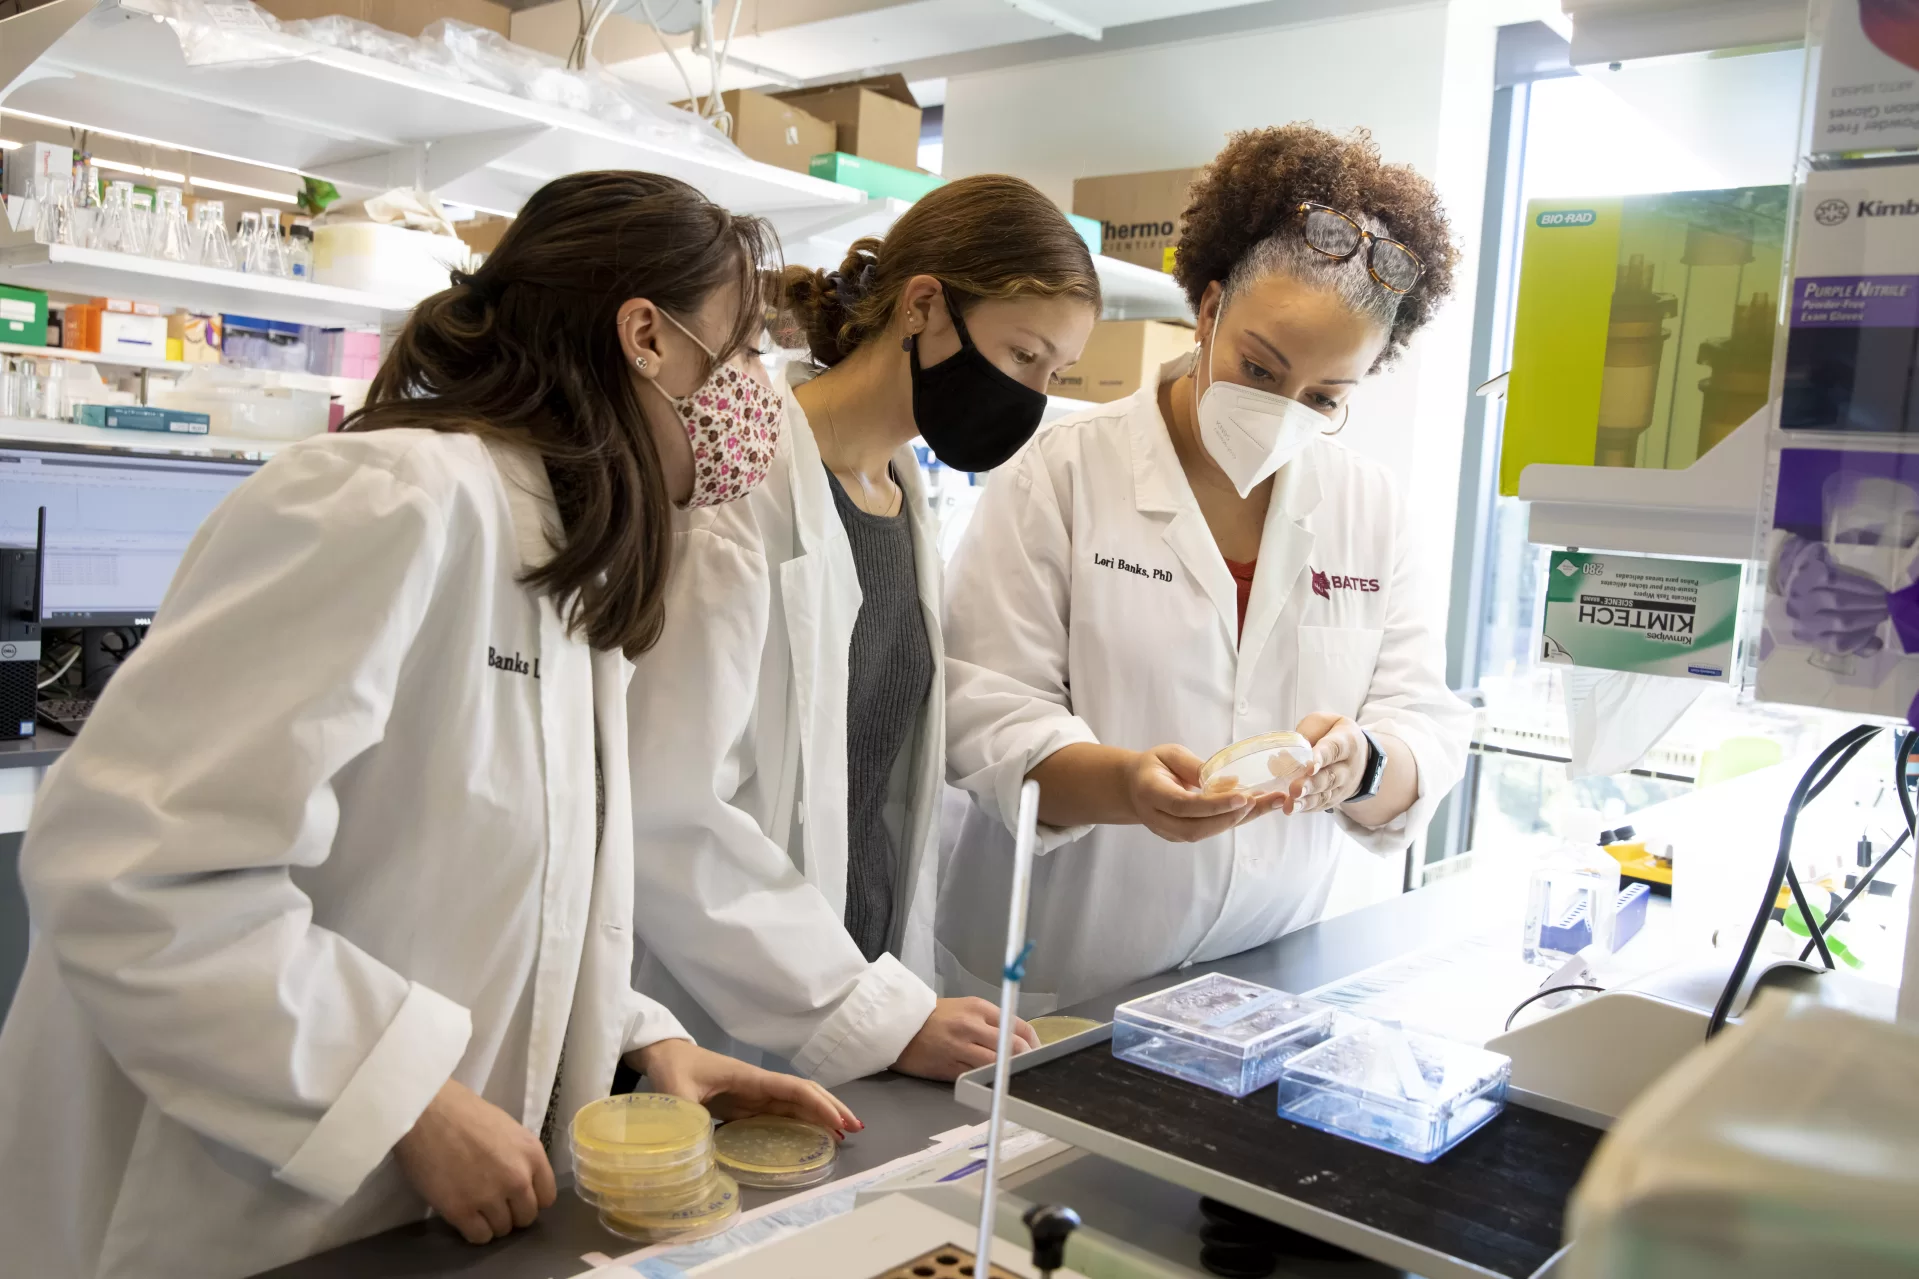 Assistant Professor of Biology Lori Banks works with her thesis students in her second floor lab in Bonney Science.

In group photo (pease see for IDs), from left to right: 

Osceola “Ossie” Heard ’22 of Newark, N.J., biochemistry major (gray/black sweater and black mask)

Alex Weissman ’22 of Bedford, Mass, a biology major, chemistry minor (black sweater, bunny mask)

Dr. Lori Banks

Maddie Feldmeier ’22 of Palo Alto, Calf., a biochemistry minor (fray sweater, black mask)

Emily Claire Duffy ’22 of Belmont Mass., a biology major, chemistry minor (maroon sweater and black mask)

Clara Porter ’22 of Portland, Ore., a biology major, chemistry minor (black turtle neck, pink flower mask)